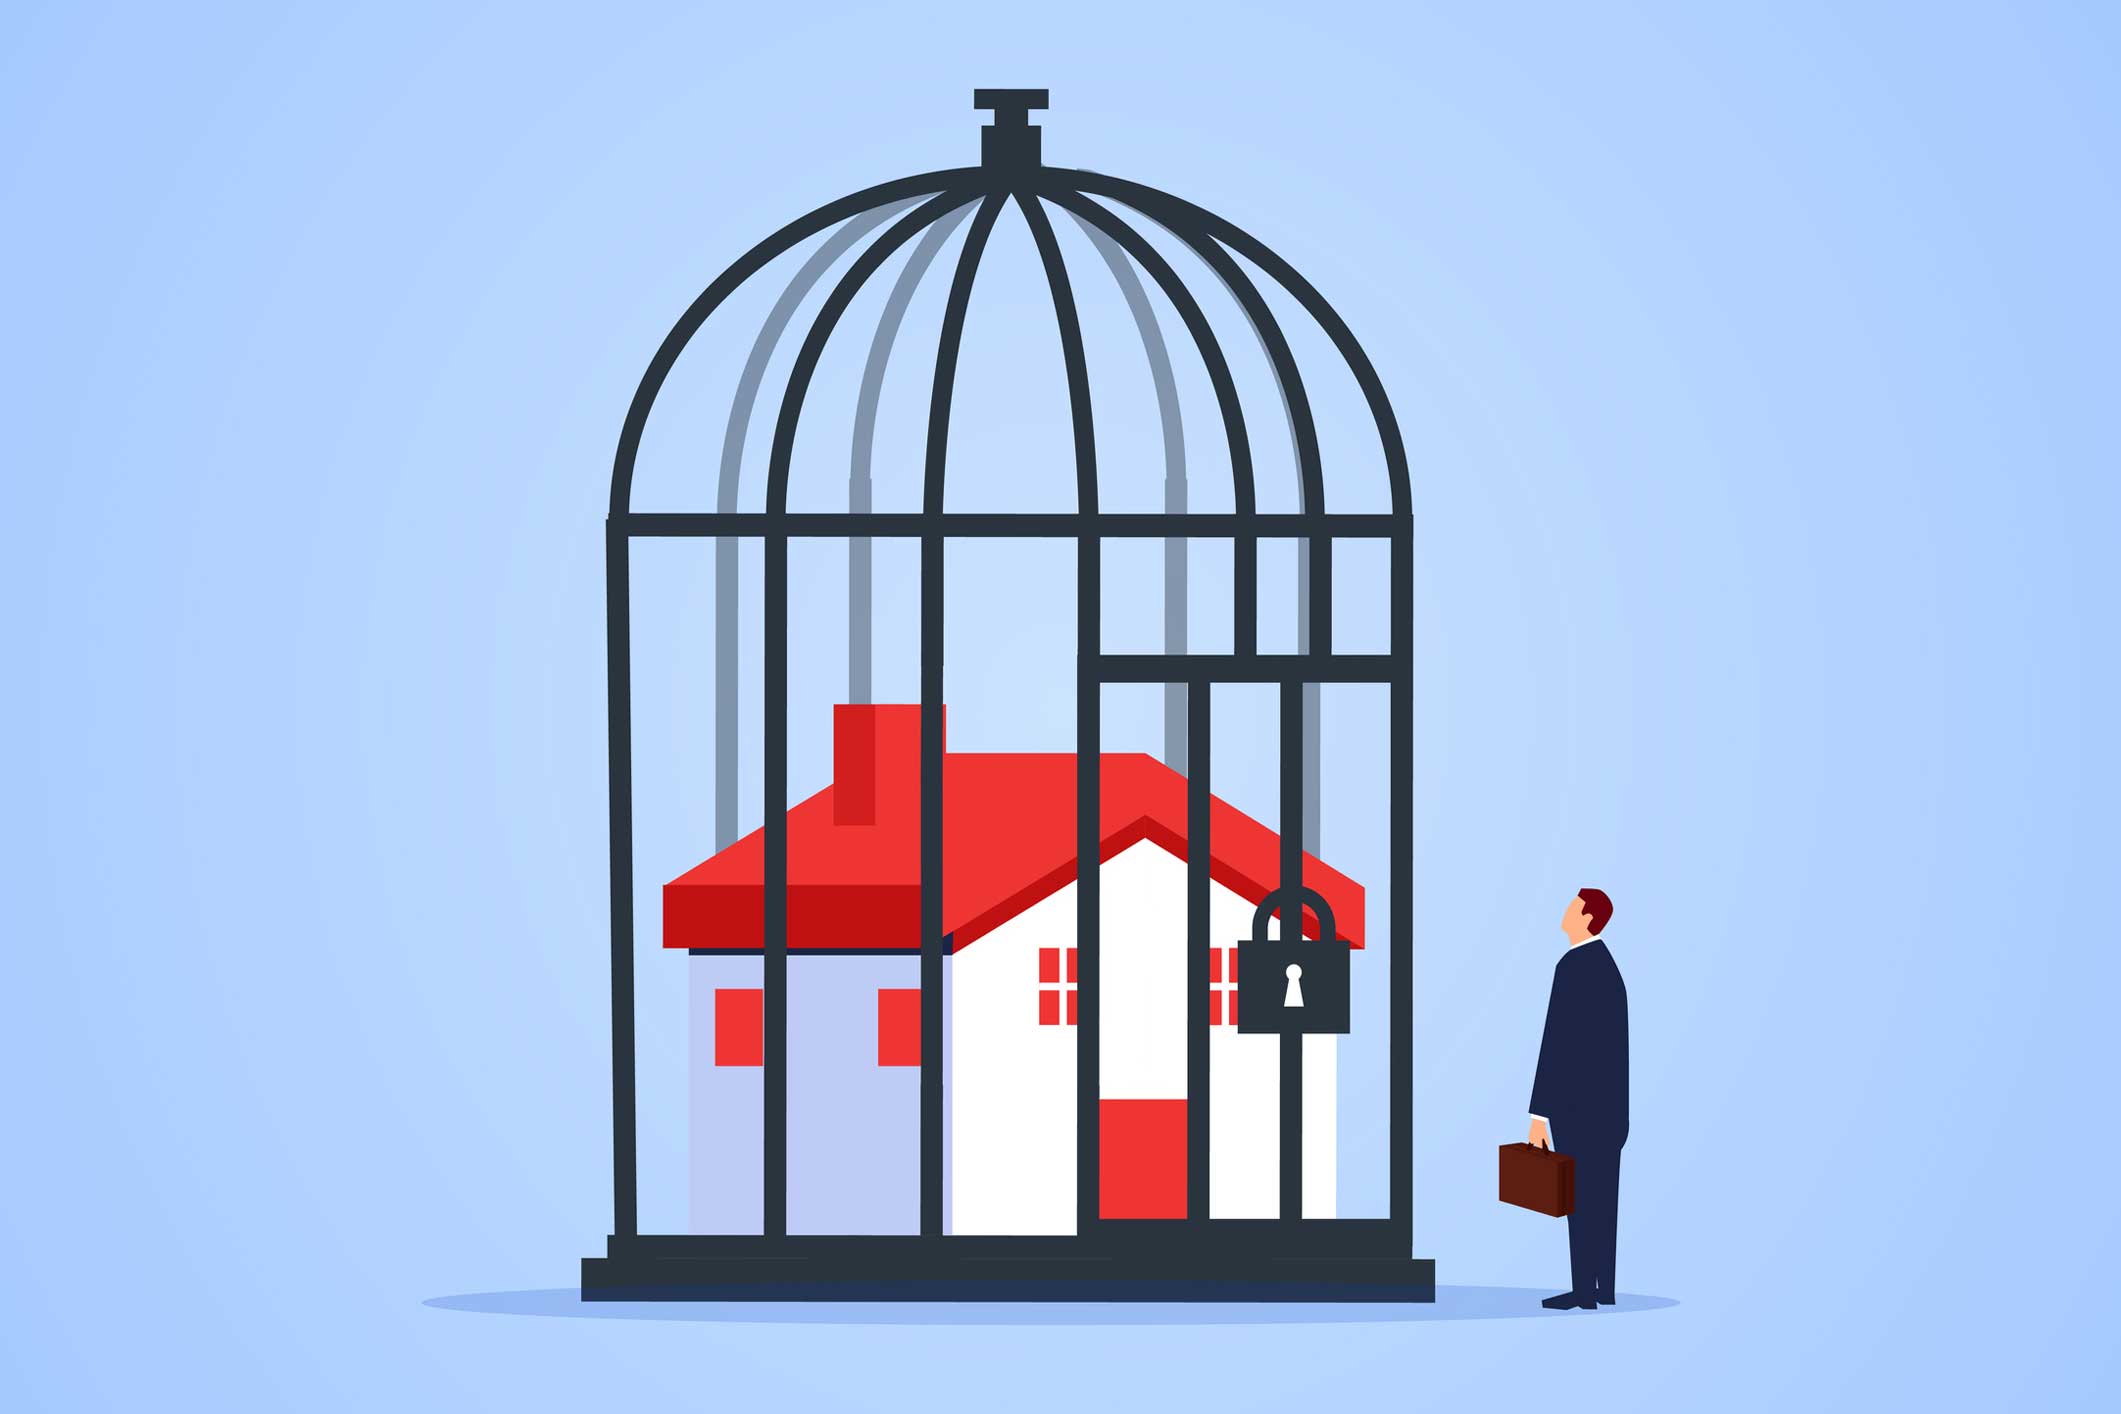 An illustration of a house locked in a bird cage